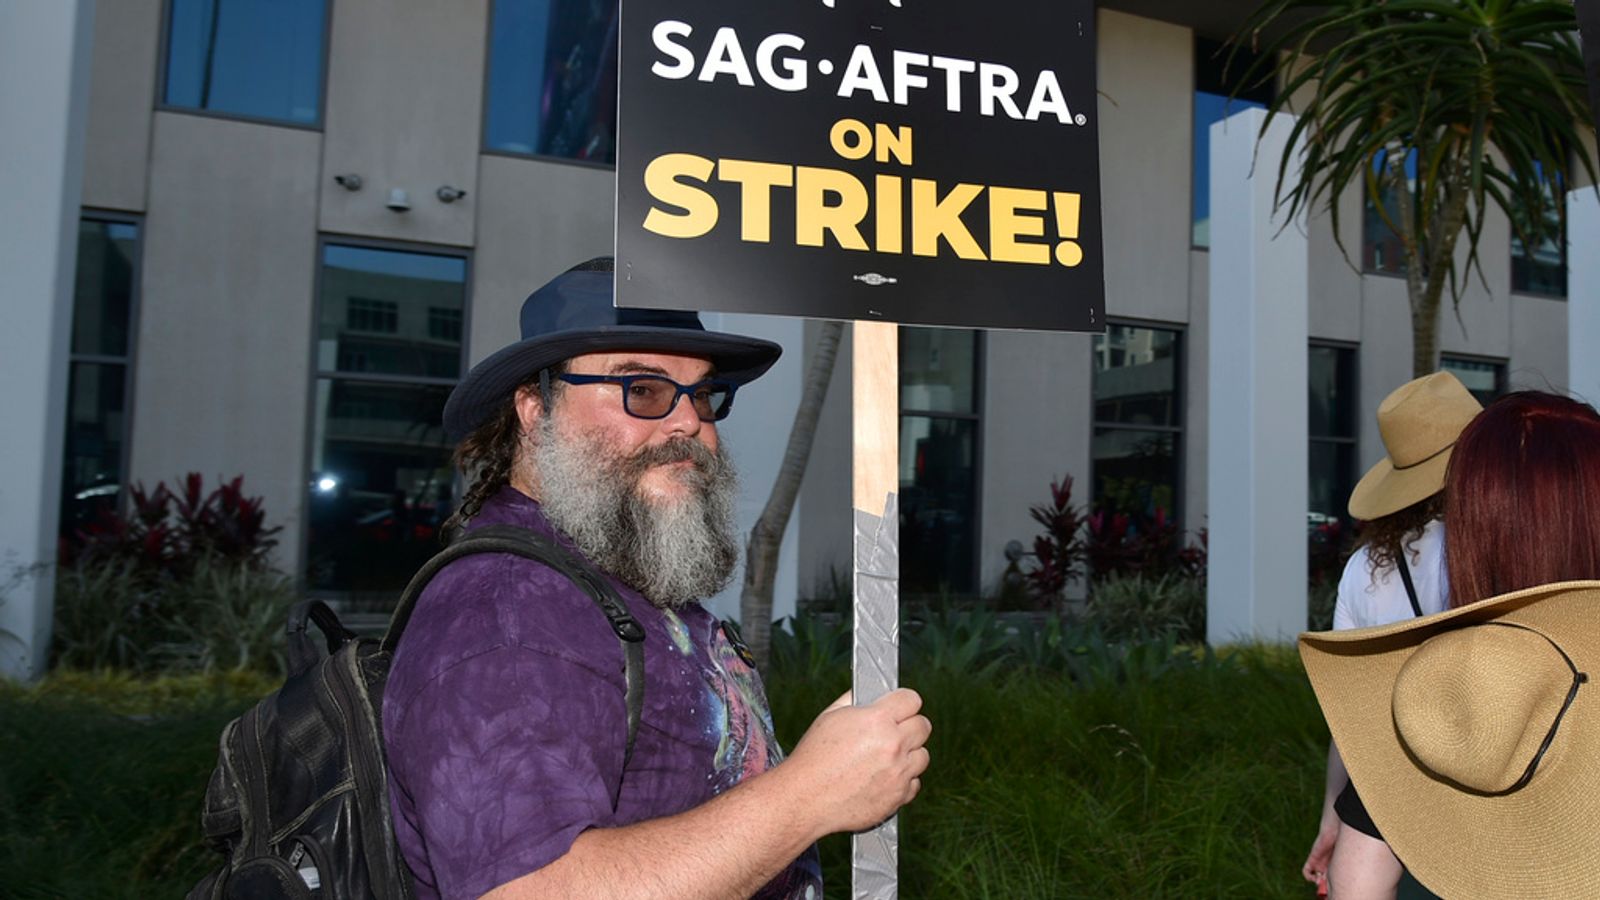 US actors' union SAG-AFTRA hails 'enormous victory' as it ratifies deal that ended strike